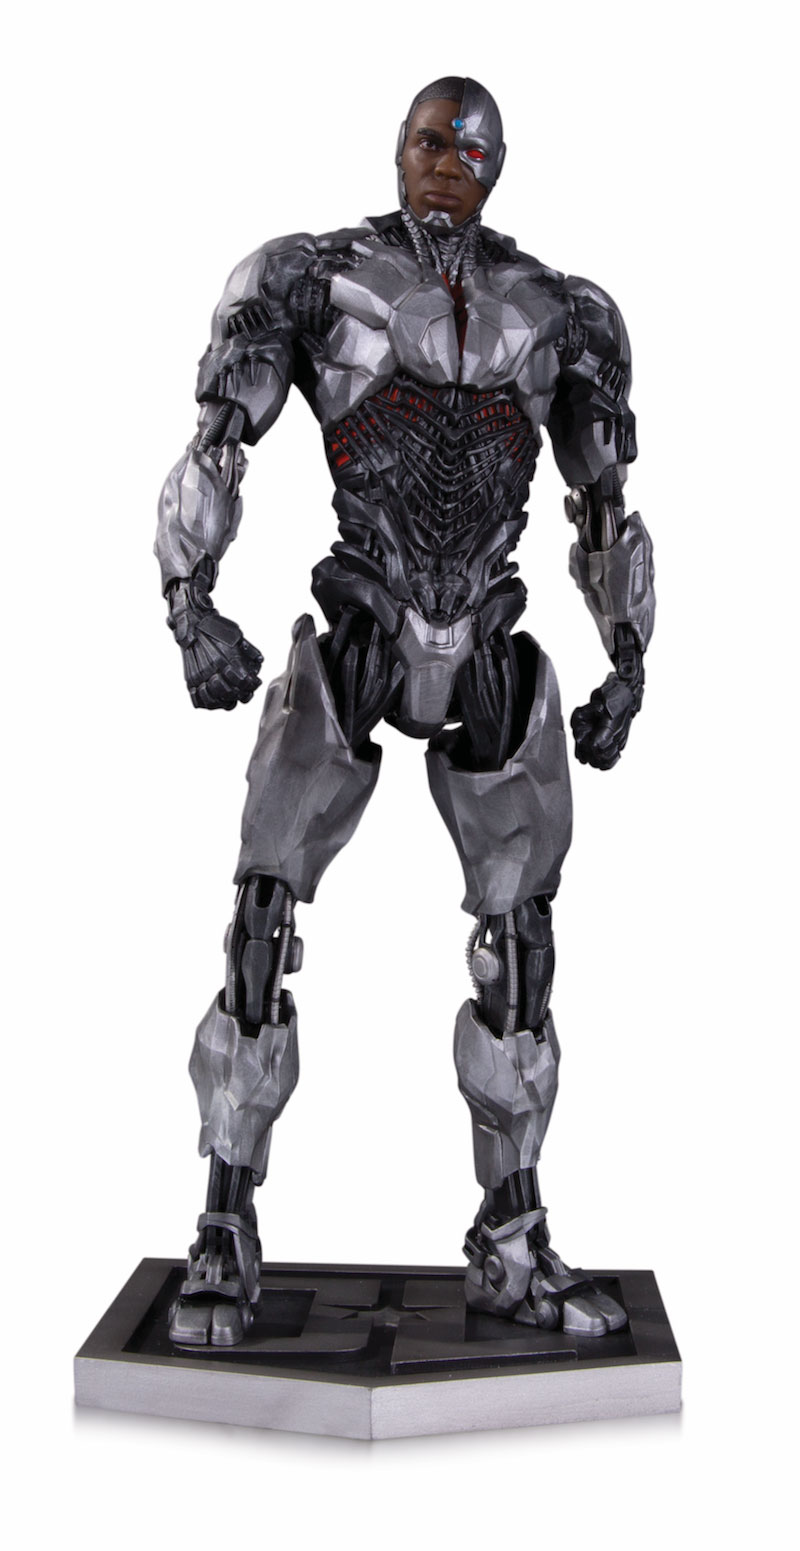 JUSTICE LEAGUE MOVIE STATUES: CYBORG